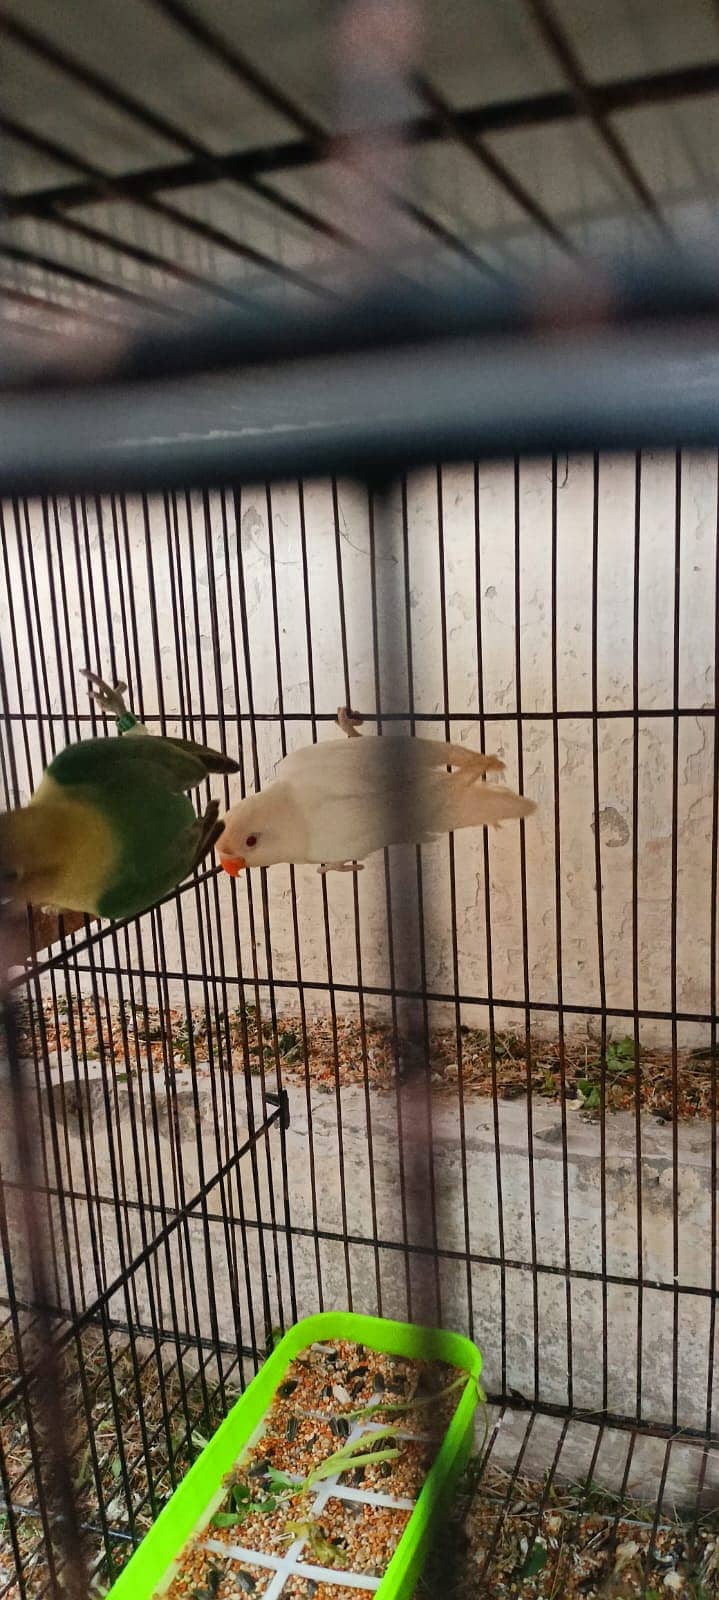 Albino red eye and parblue split ino 0307 7759092 0